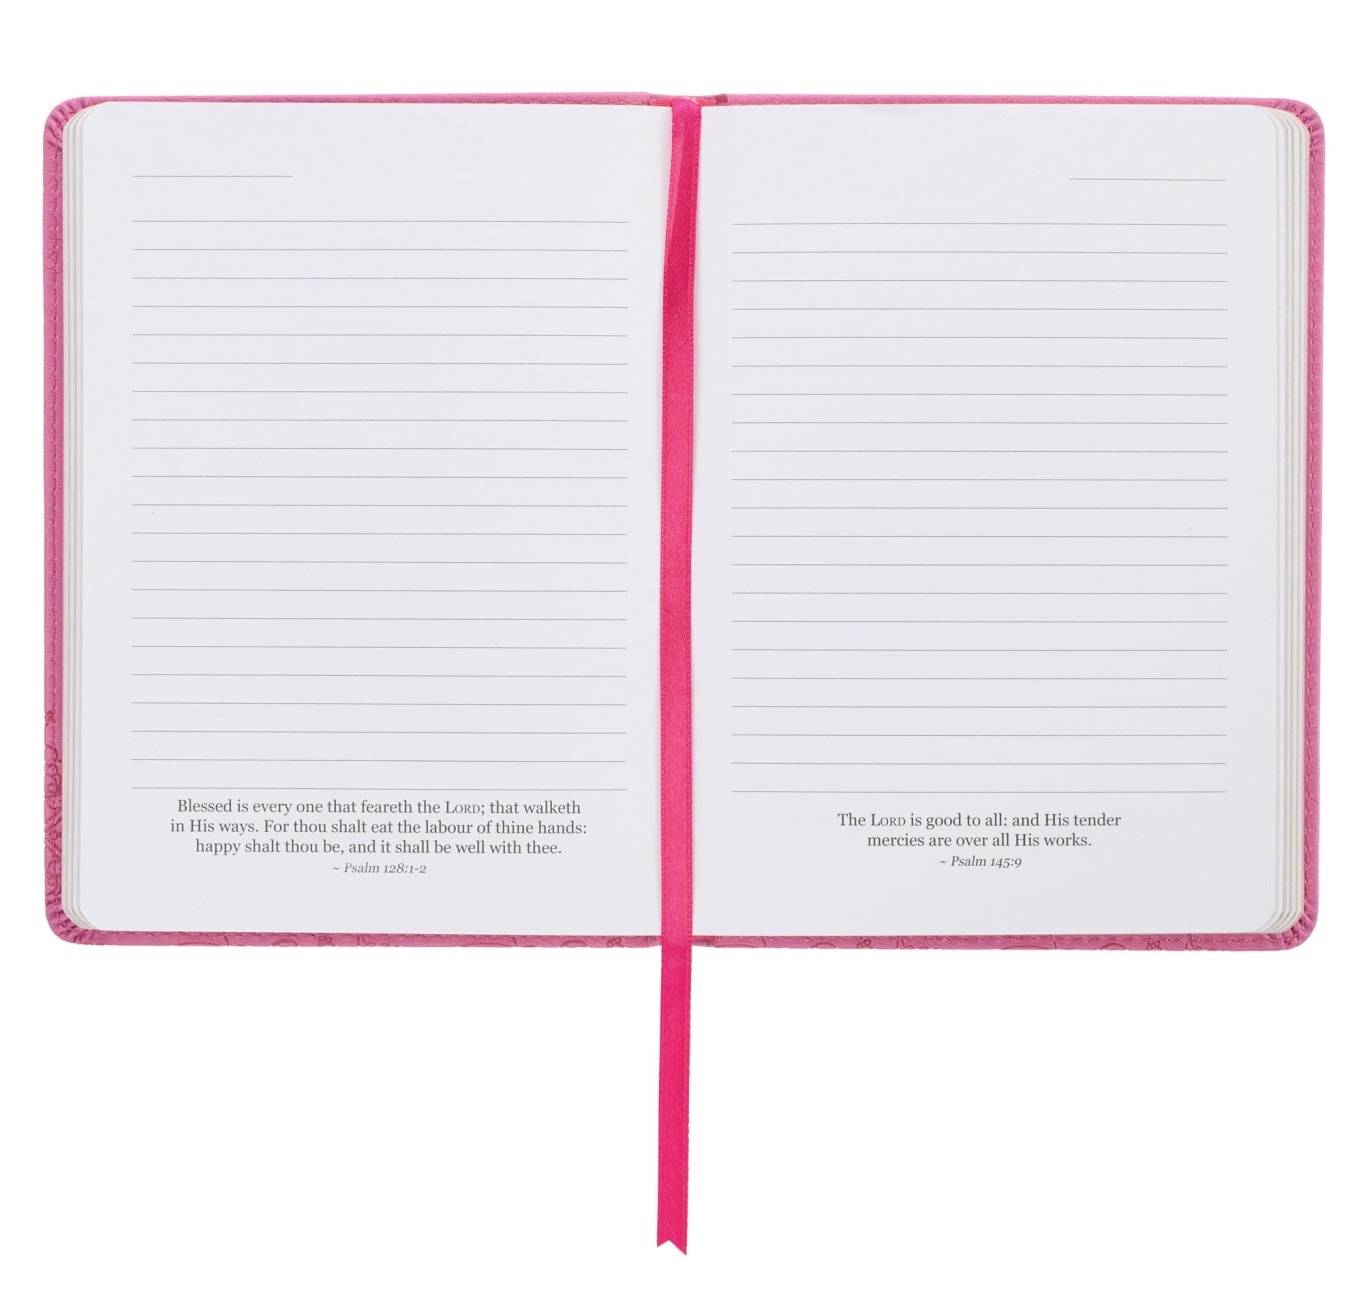 Journal: With God All Things Pink (Matthew 19:26) Imitation Leather